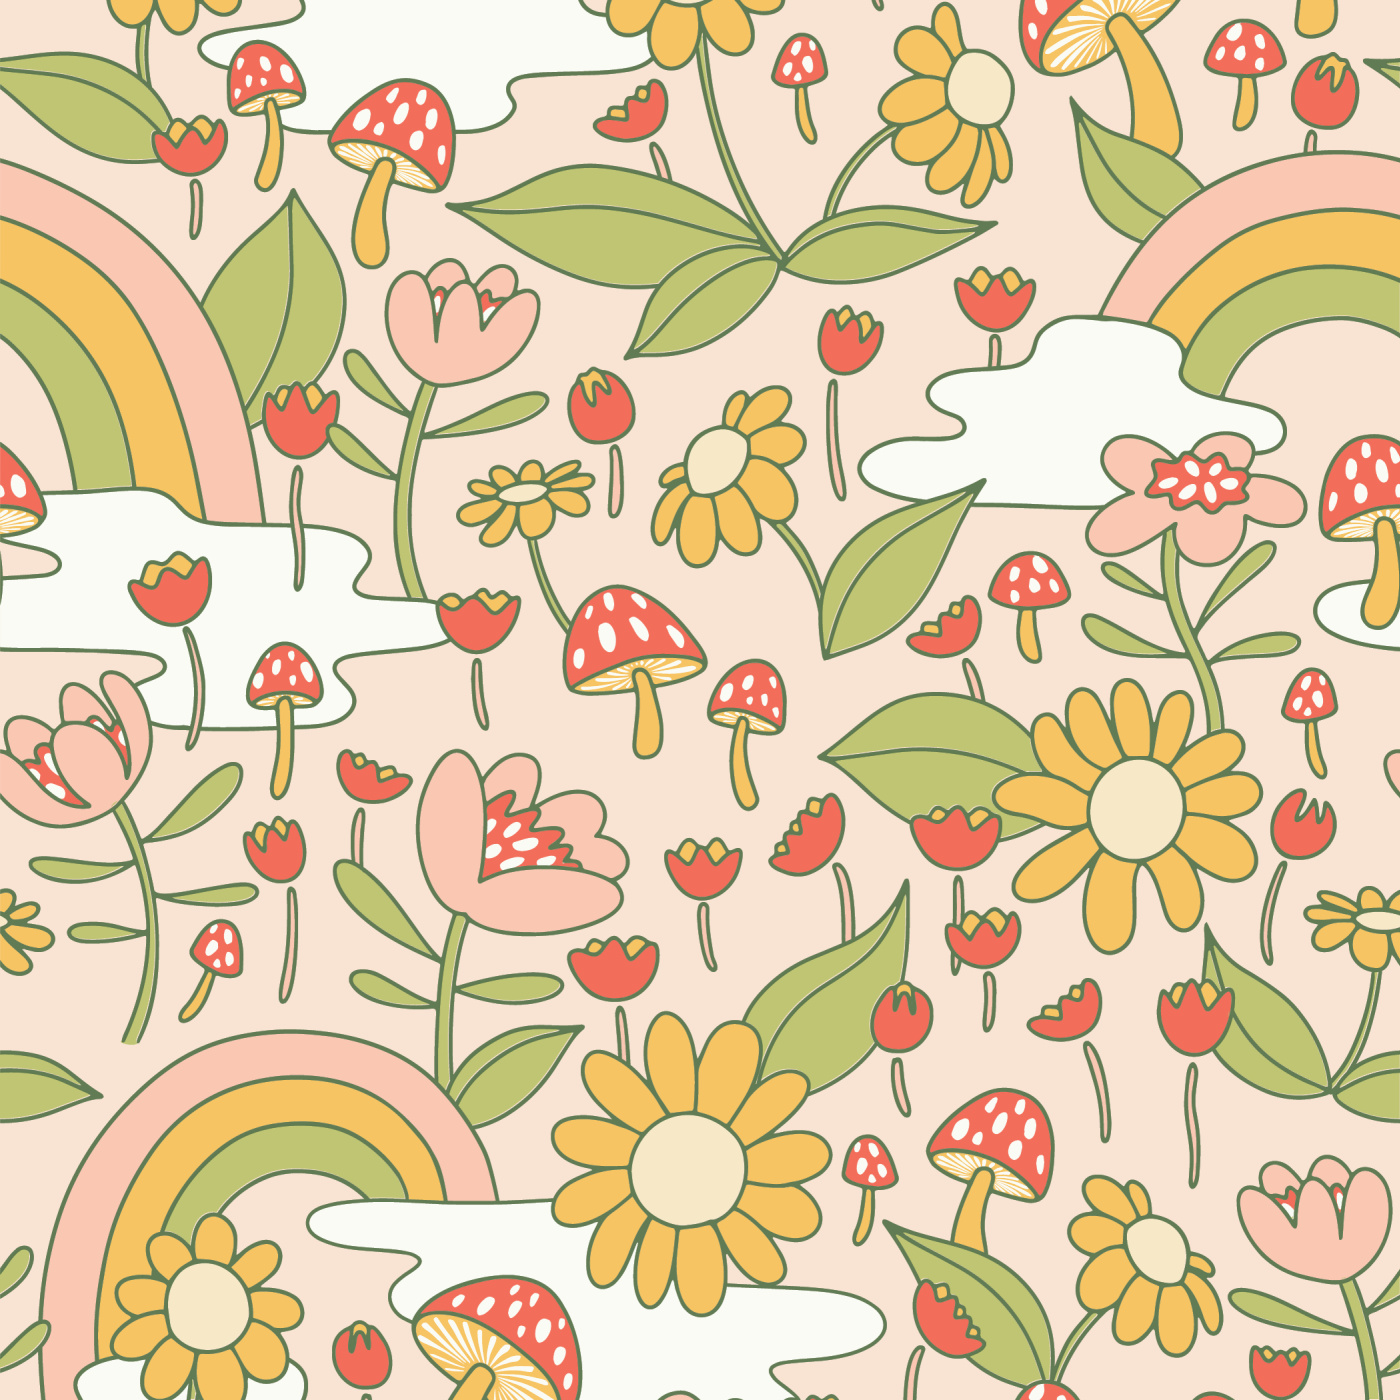 12 Groovy wallpapers